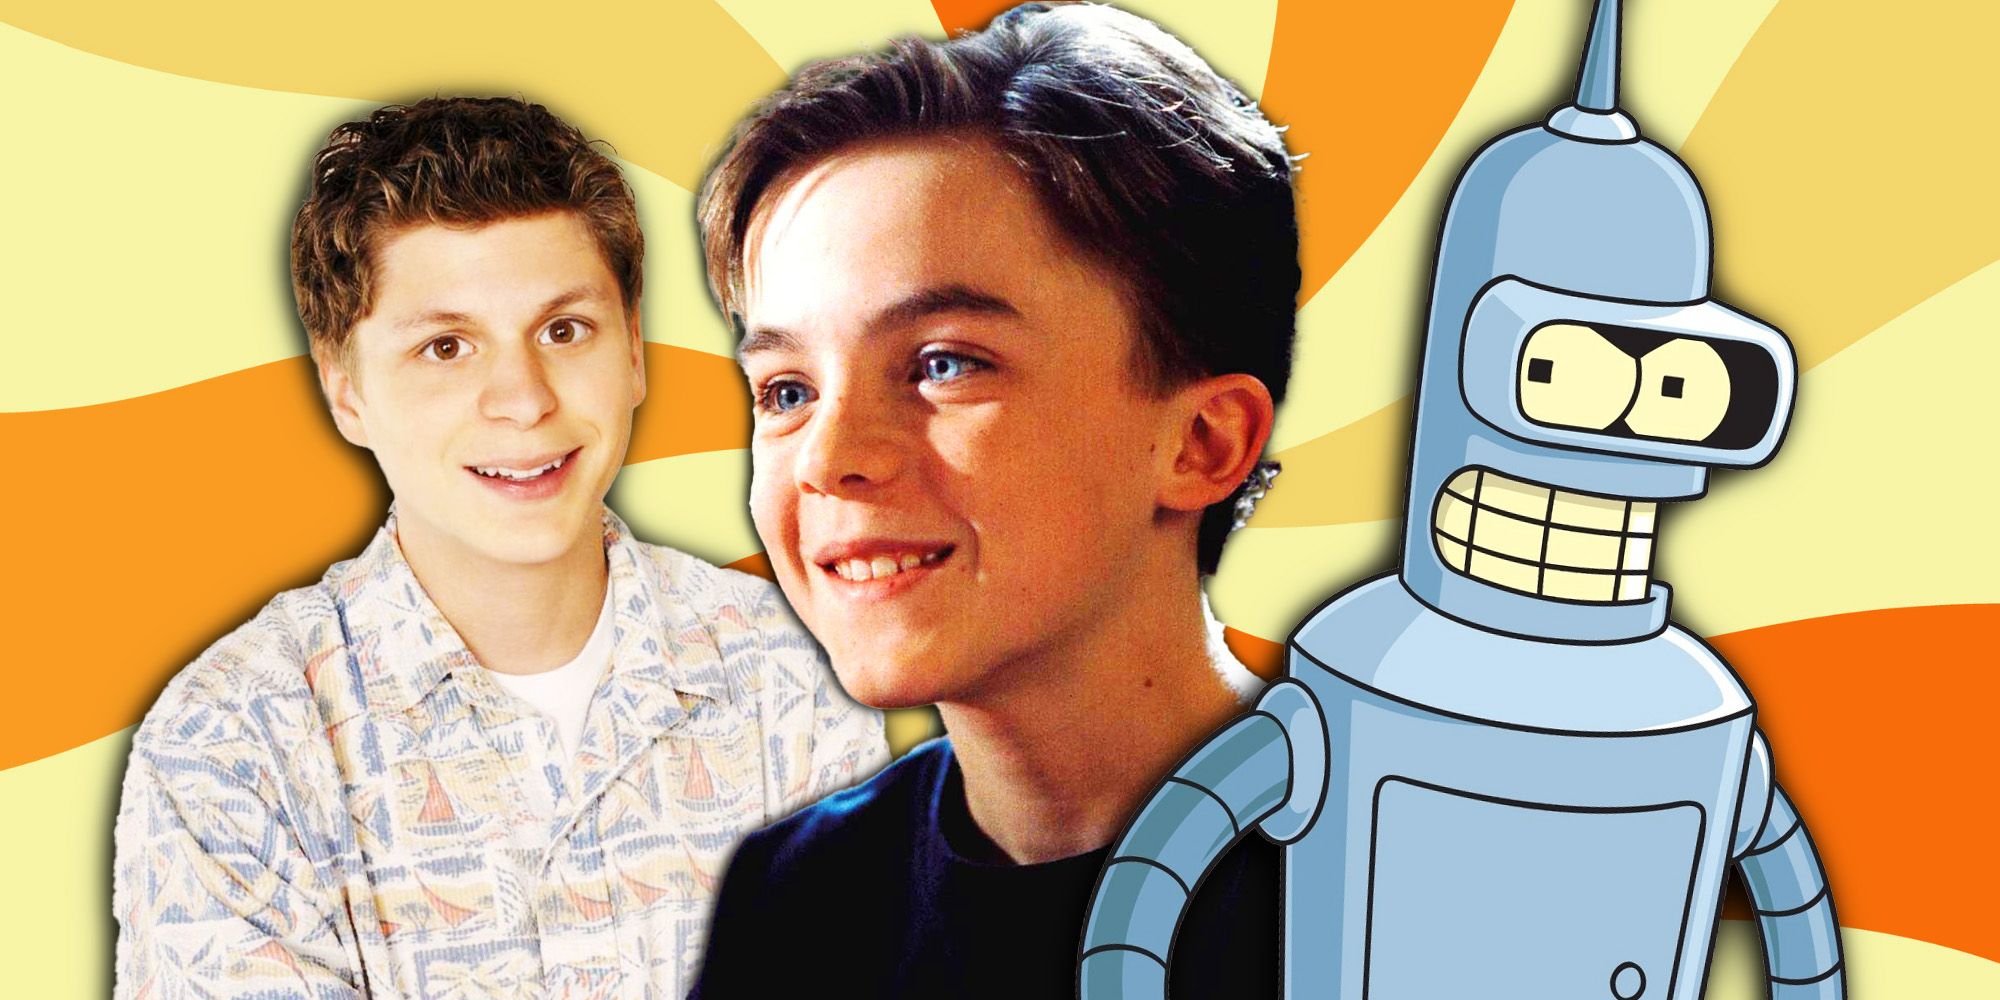 Bender from Futurama, Michael Cera from Arrested Development, Frankie Muniz from Malcolm in the Middle